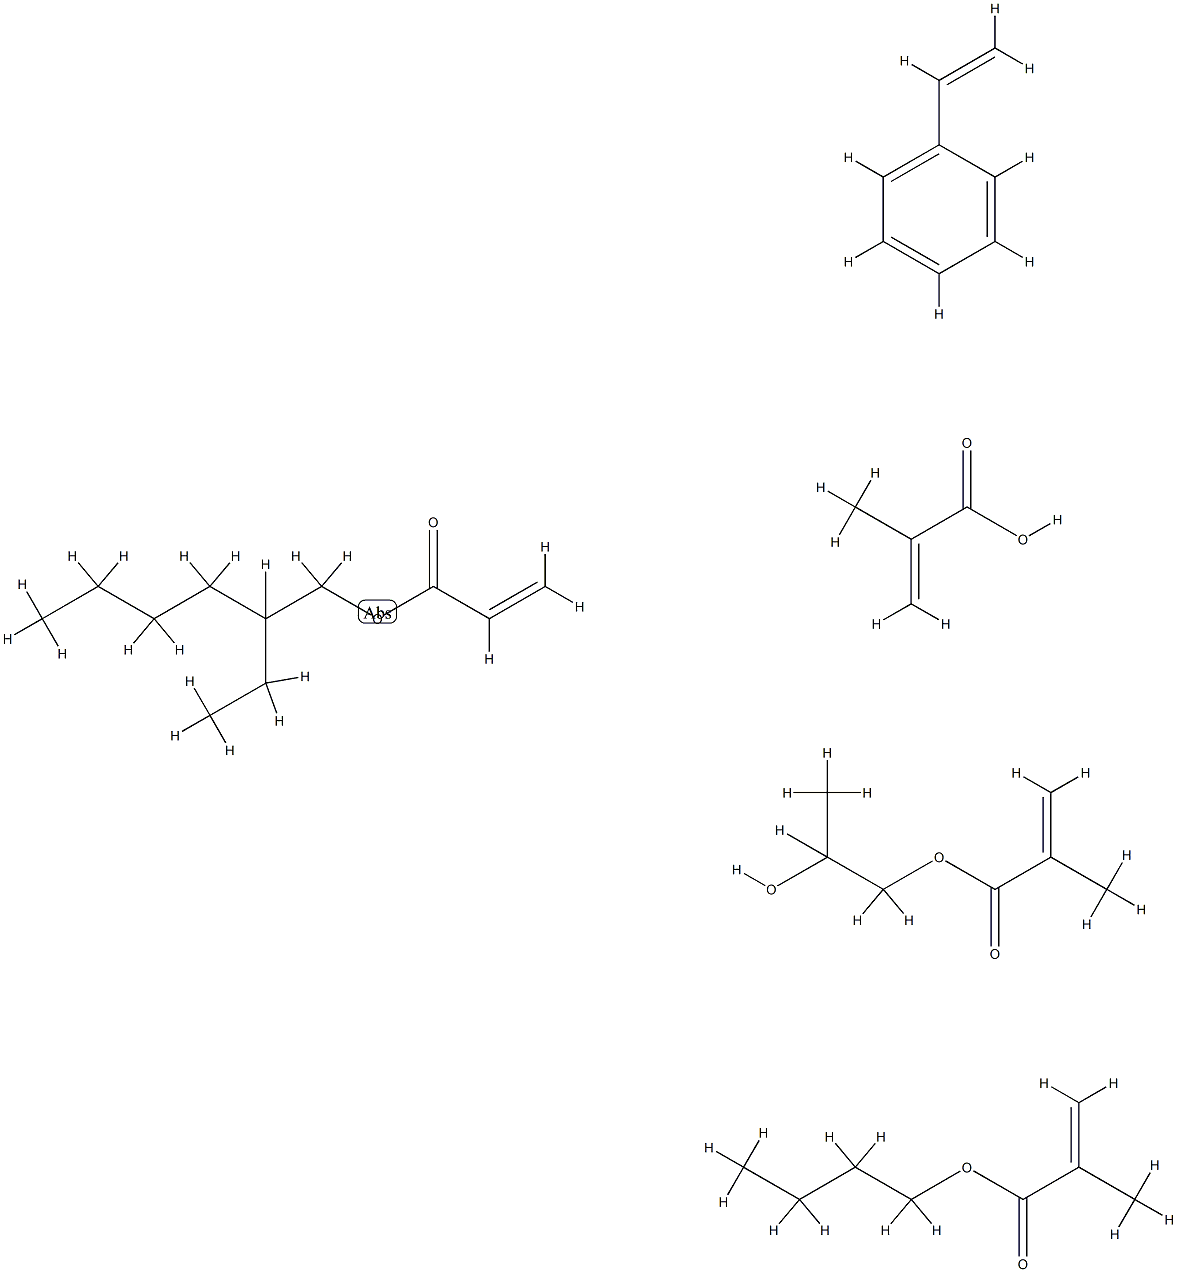 2-Propenoic acid, 2-methyl-, polymer with butyl 2-methyl-2-propenoate, ethenylbenzene, 2-ethylhexyl 2-propenoate and 1,2-propanediol mono(2-methyl-2-propenoate) Structure